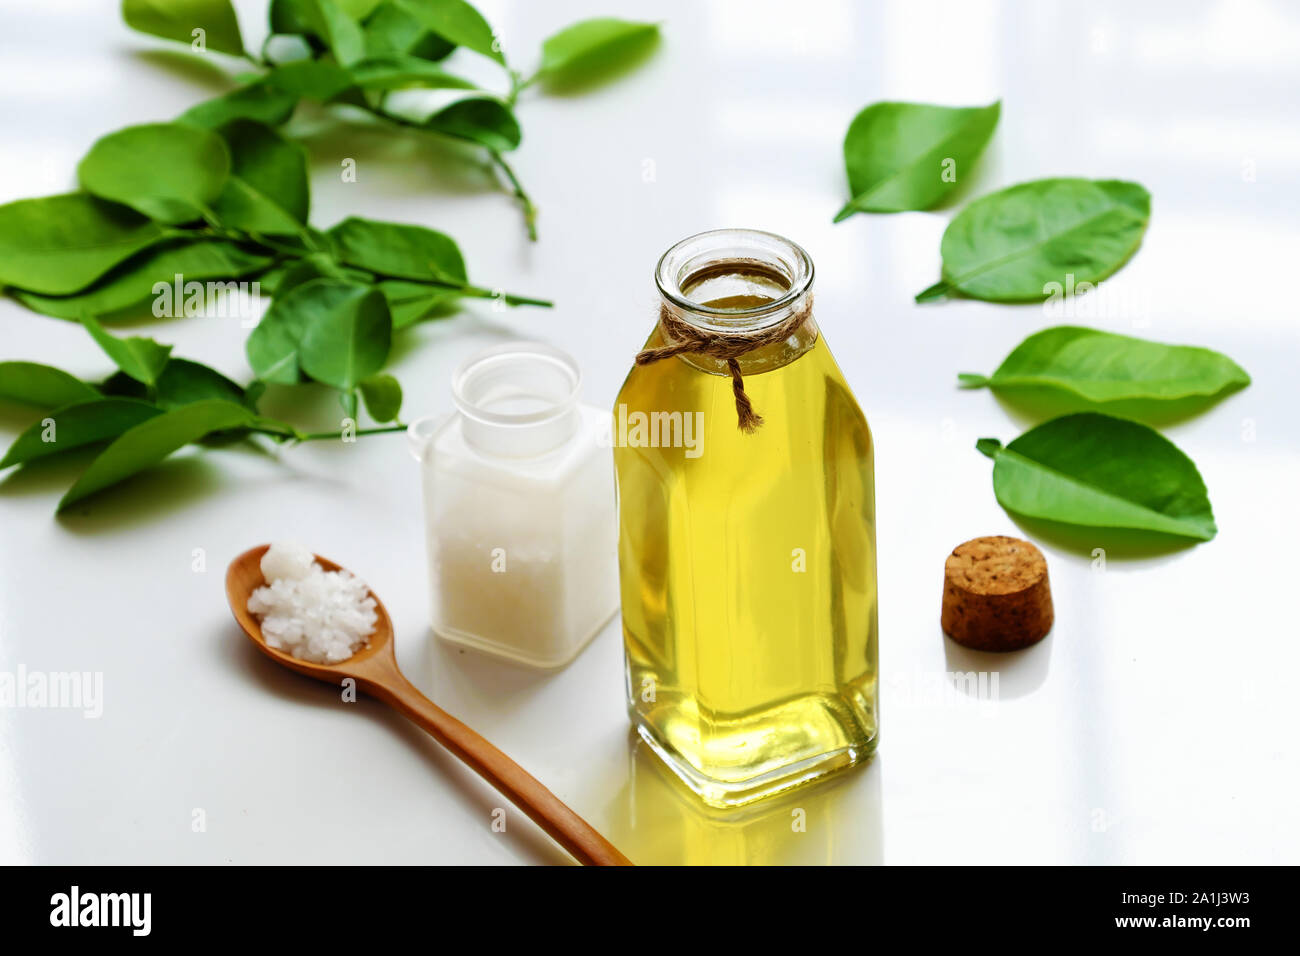 Homemade natural herbal oral care product from lemon leaves, salt boil with water make mouthwash for dental hygiene, treatment bacteria in oral cavity Stock Photo